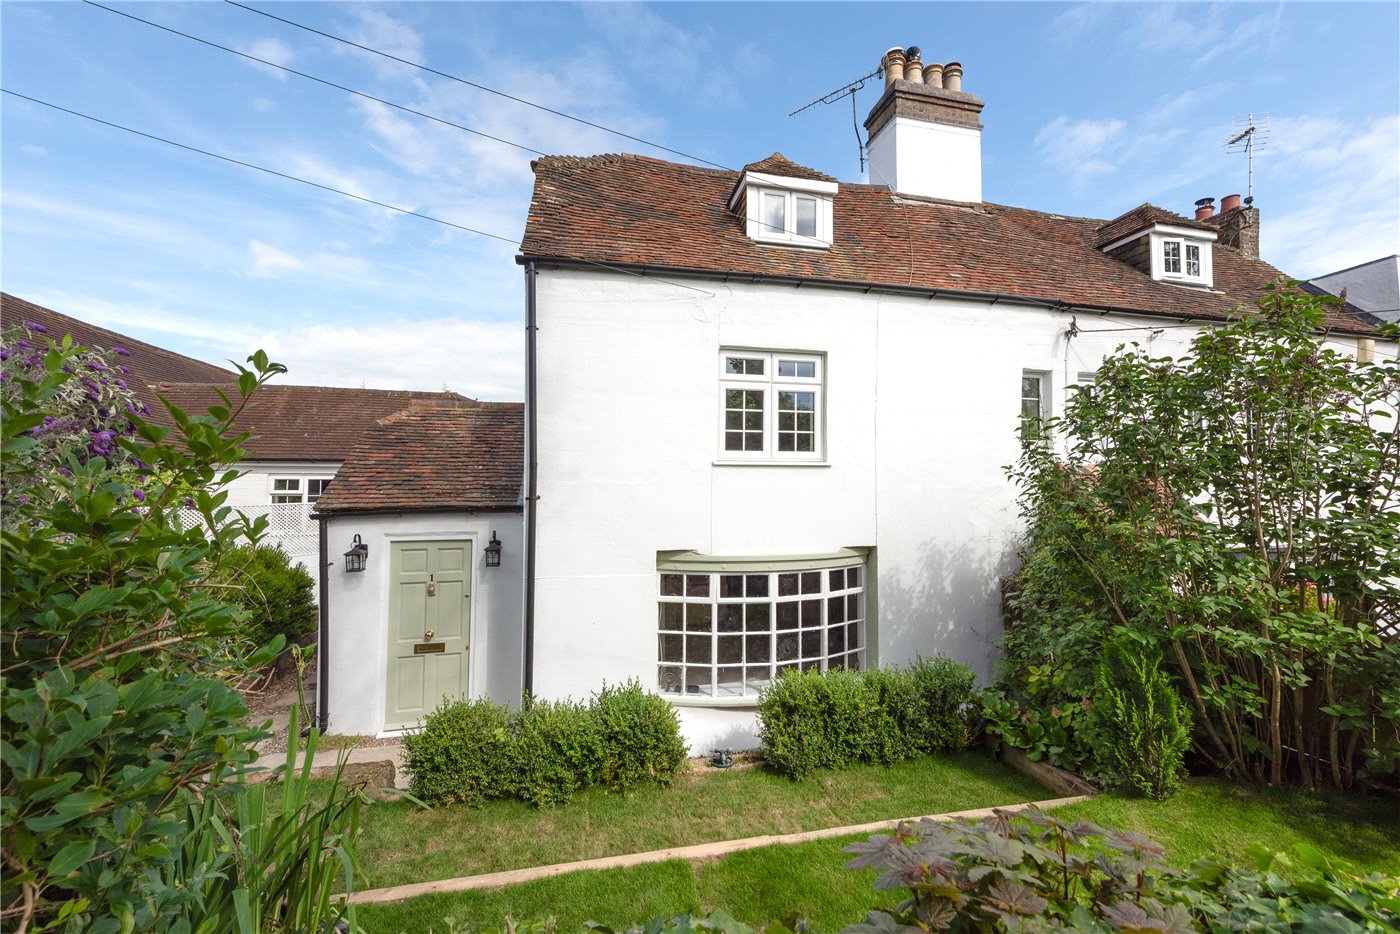 Mulberry Hill, Chilham, Canterbury, Kent, CT4